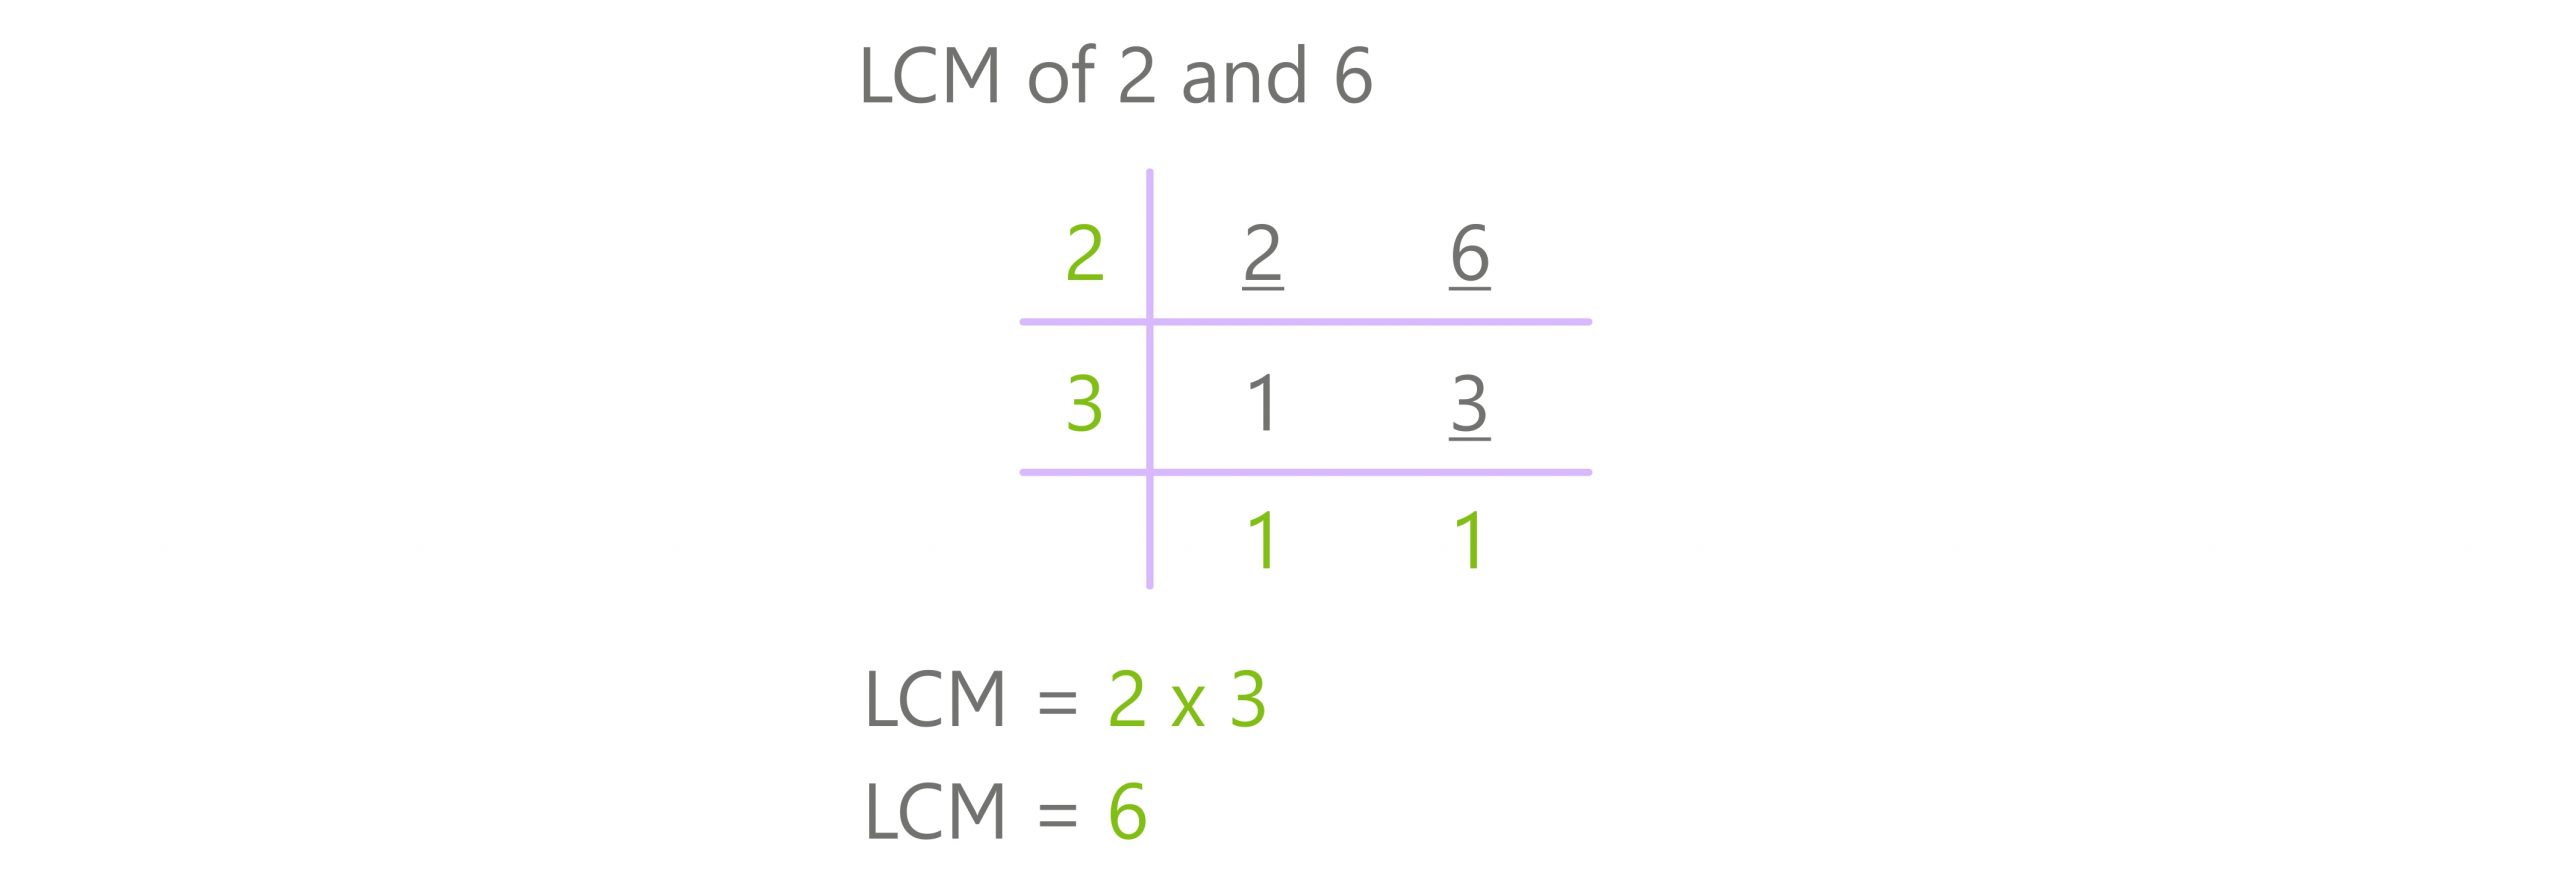 division method lcm 2 and 6